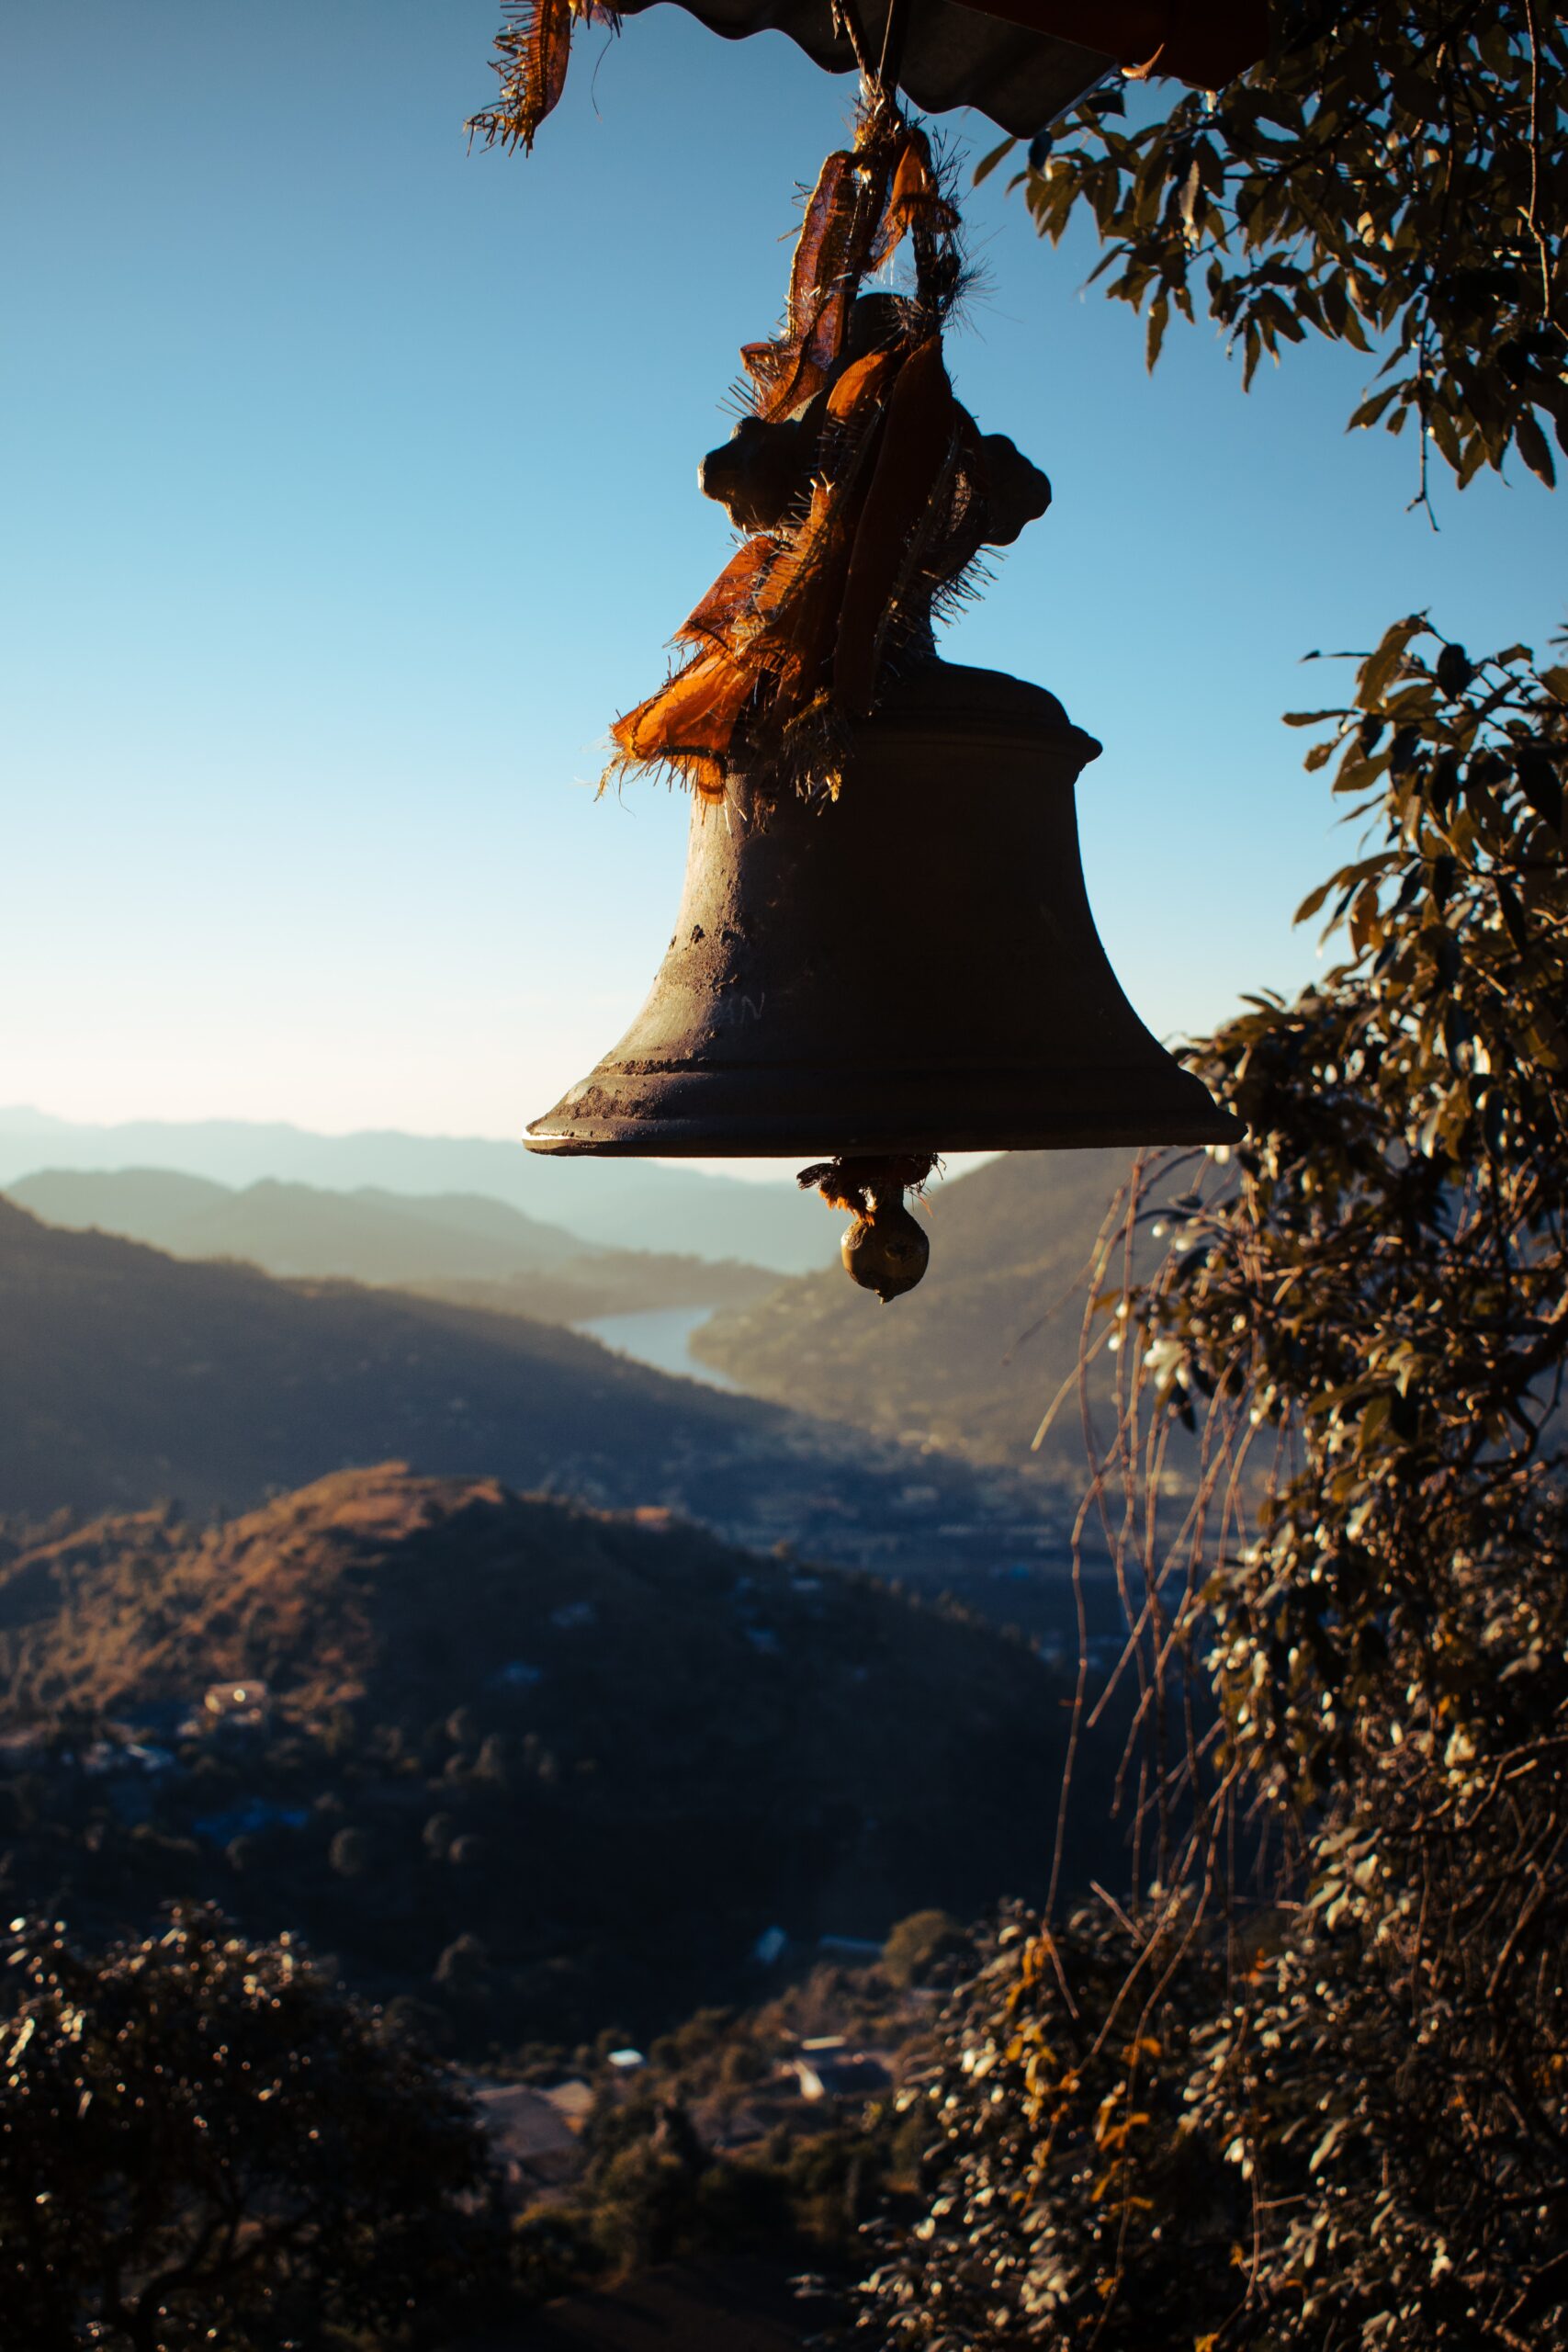 A bell as one of the auspicious symbols of Hinduism